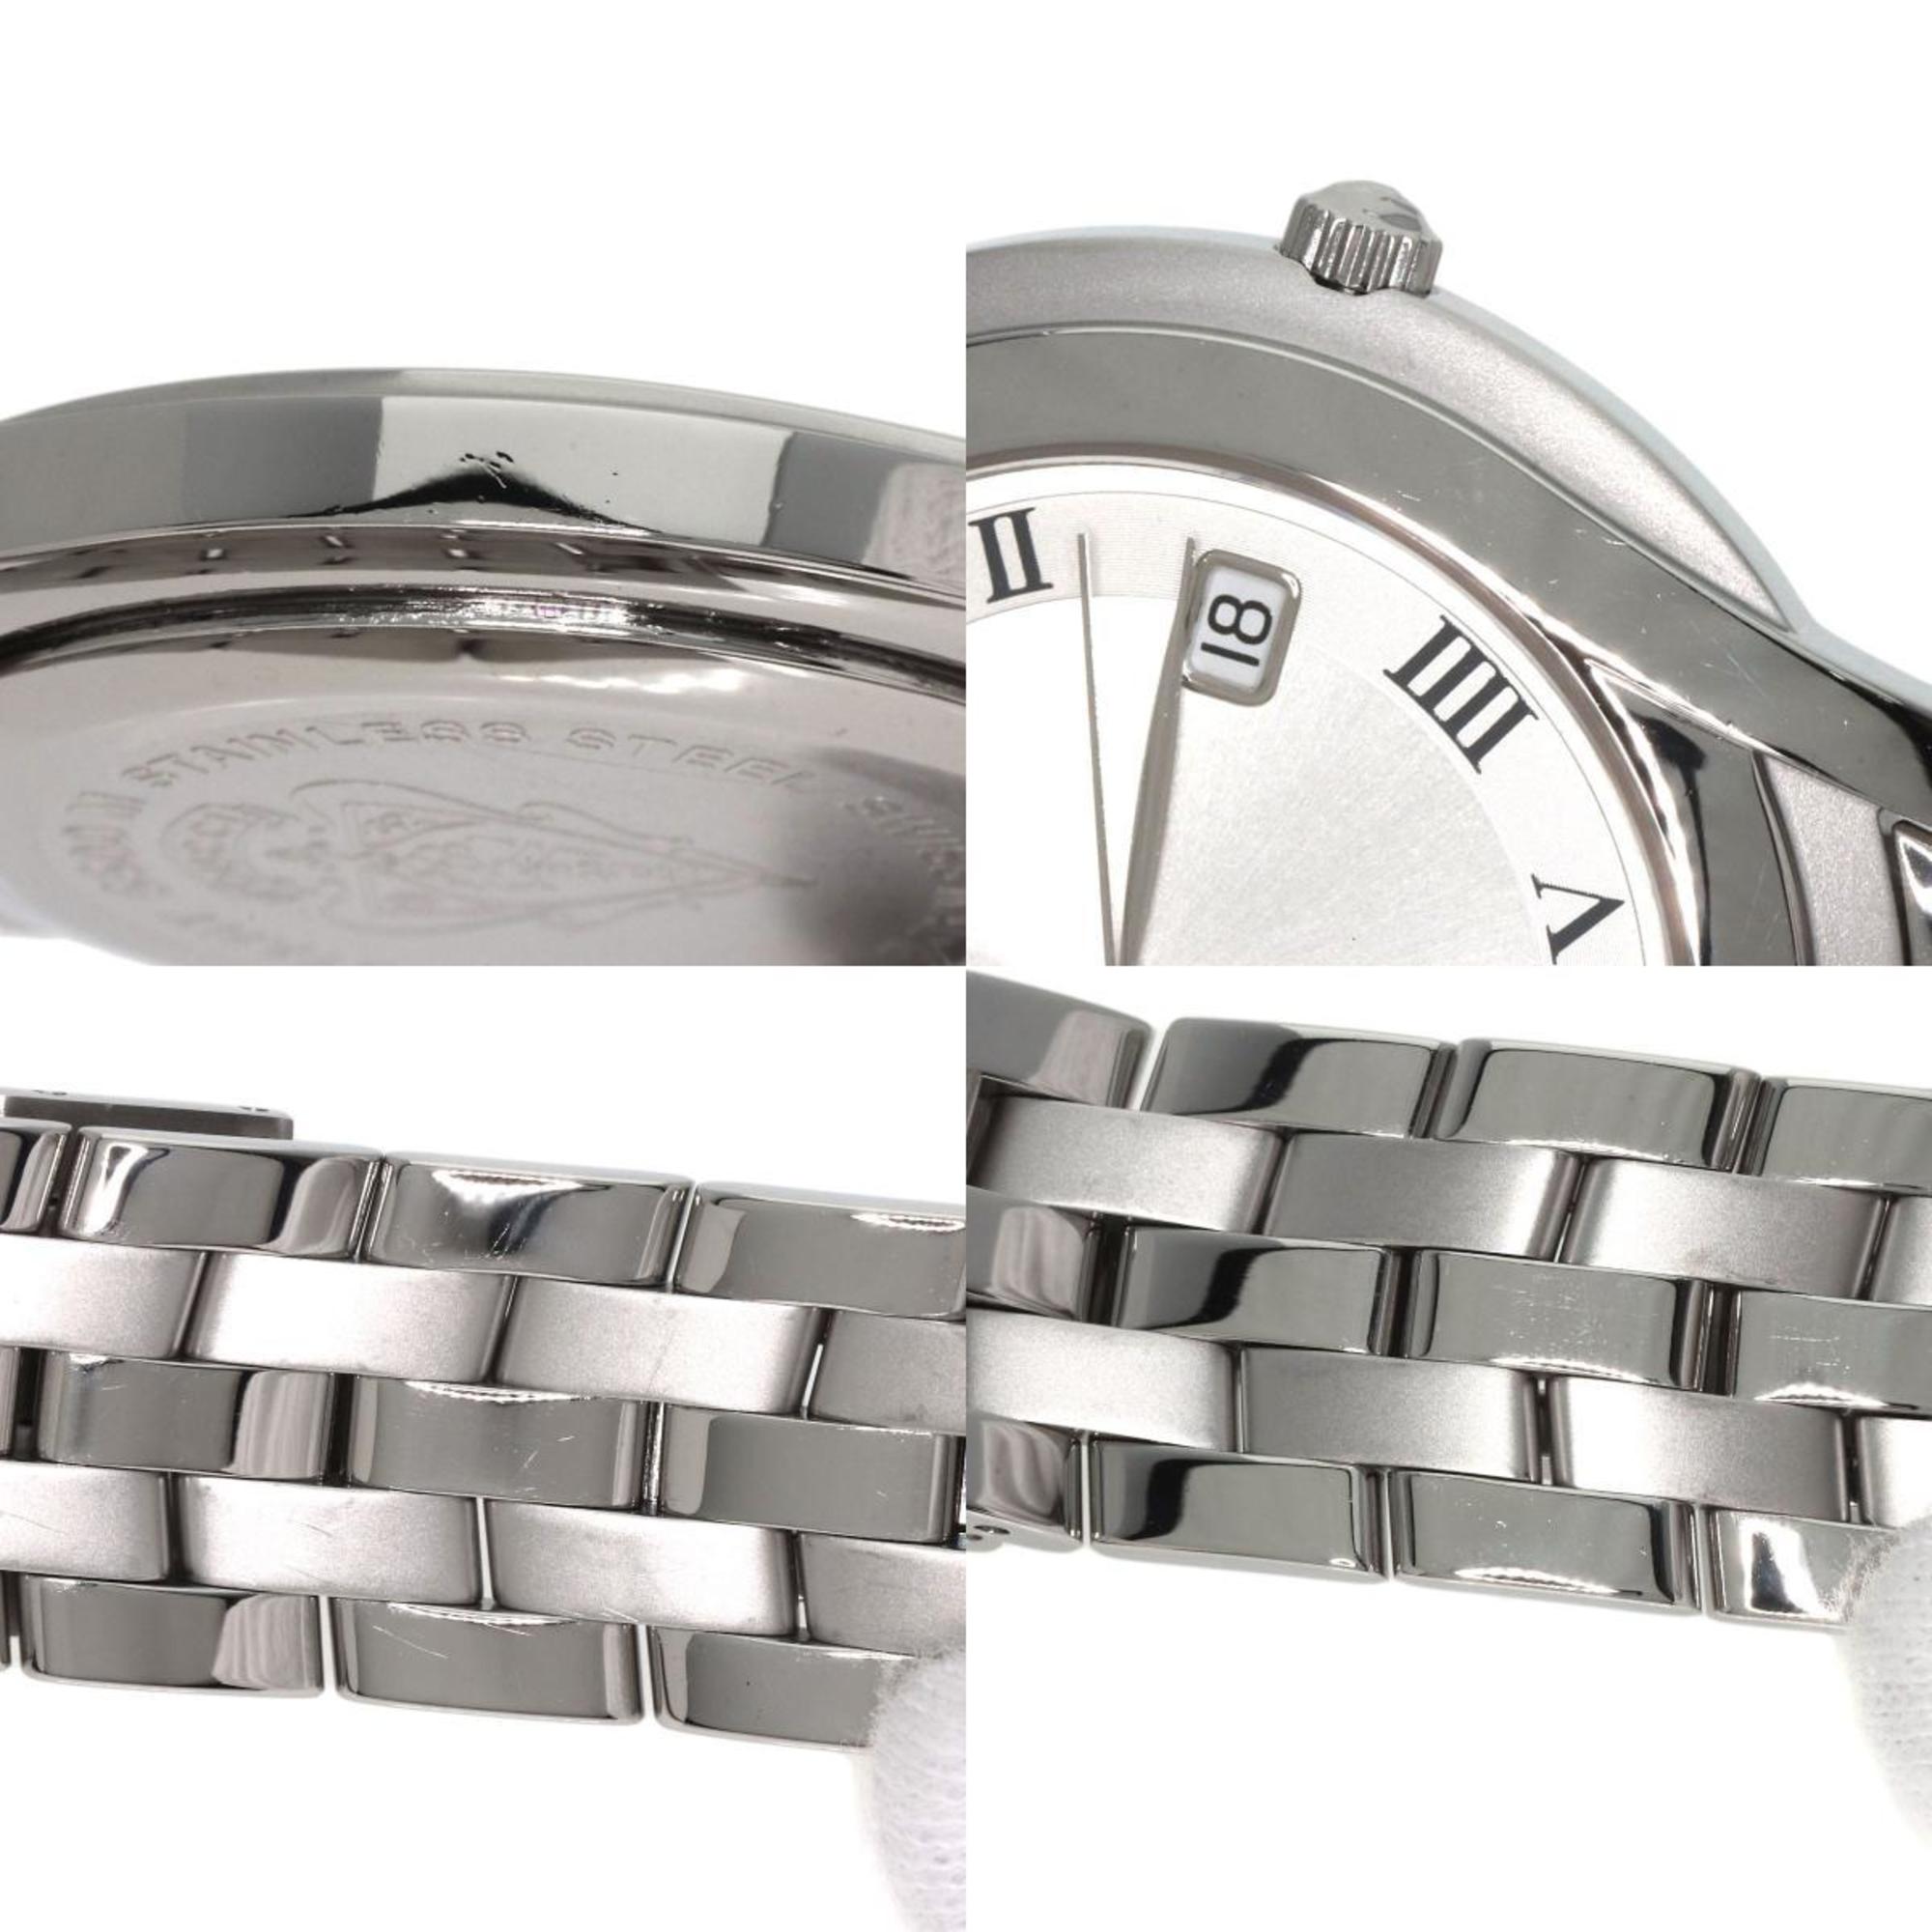 Gucci 5500M Watch Stainless Steel SS Men's